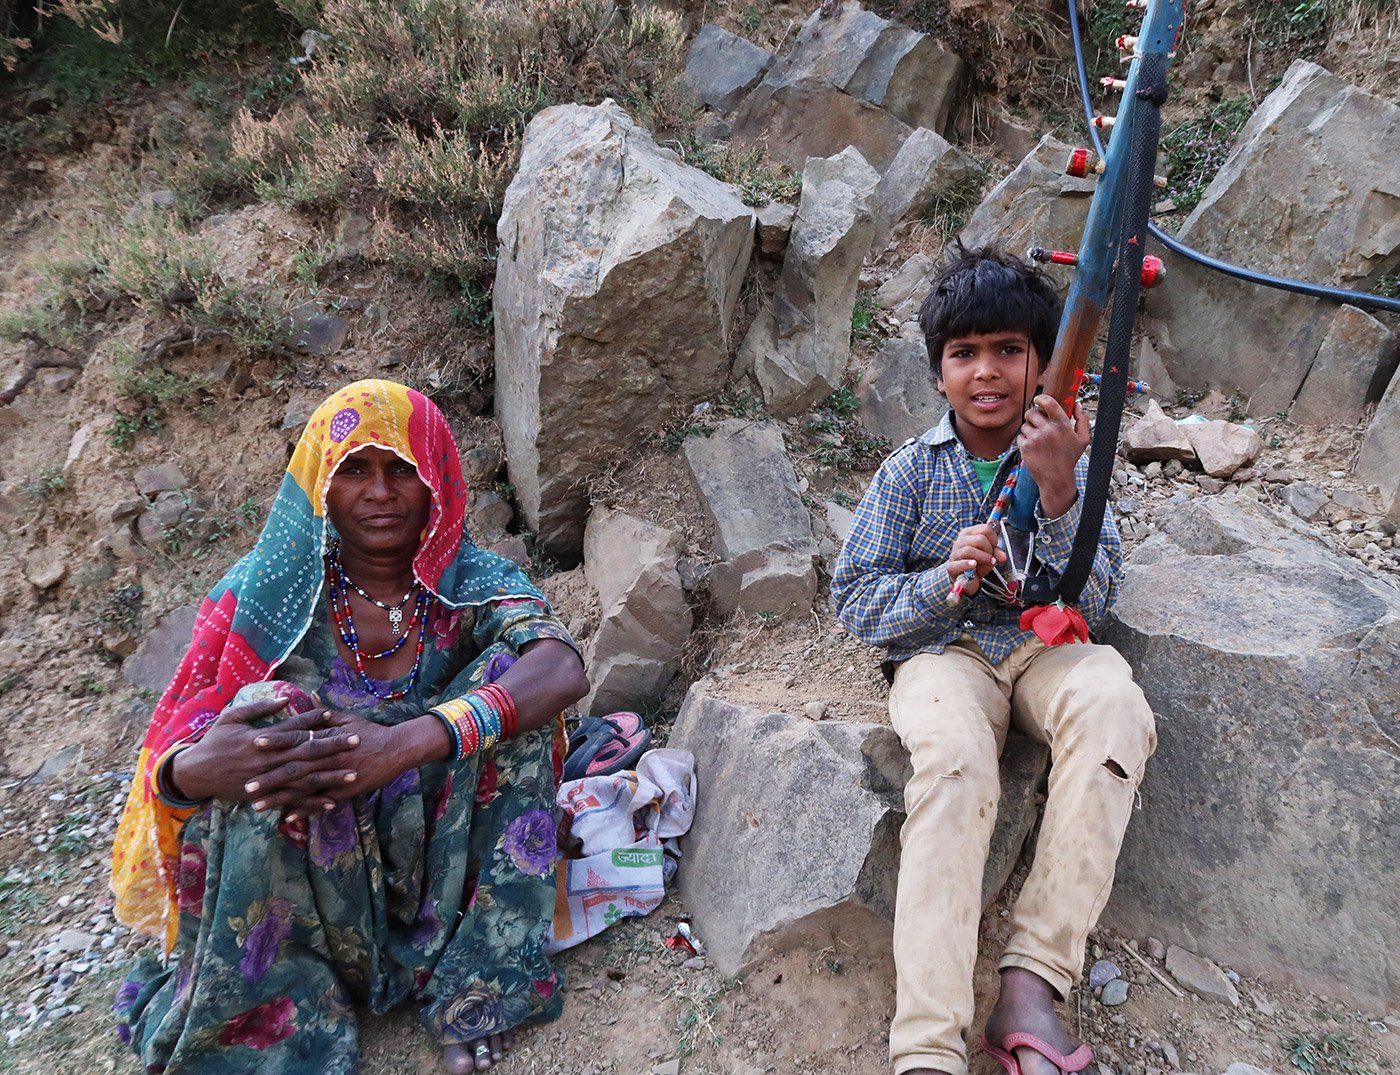 A woman and a young boy sitting amongst rocks. The boy has an instrument called ravanahatha in his hands